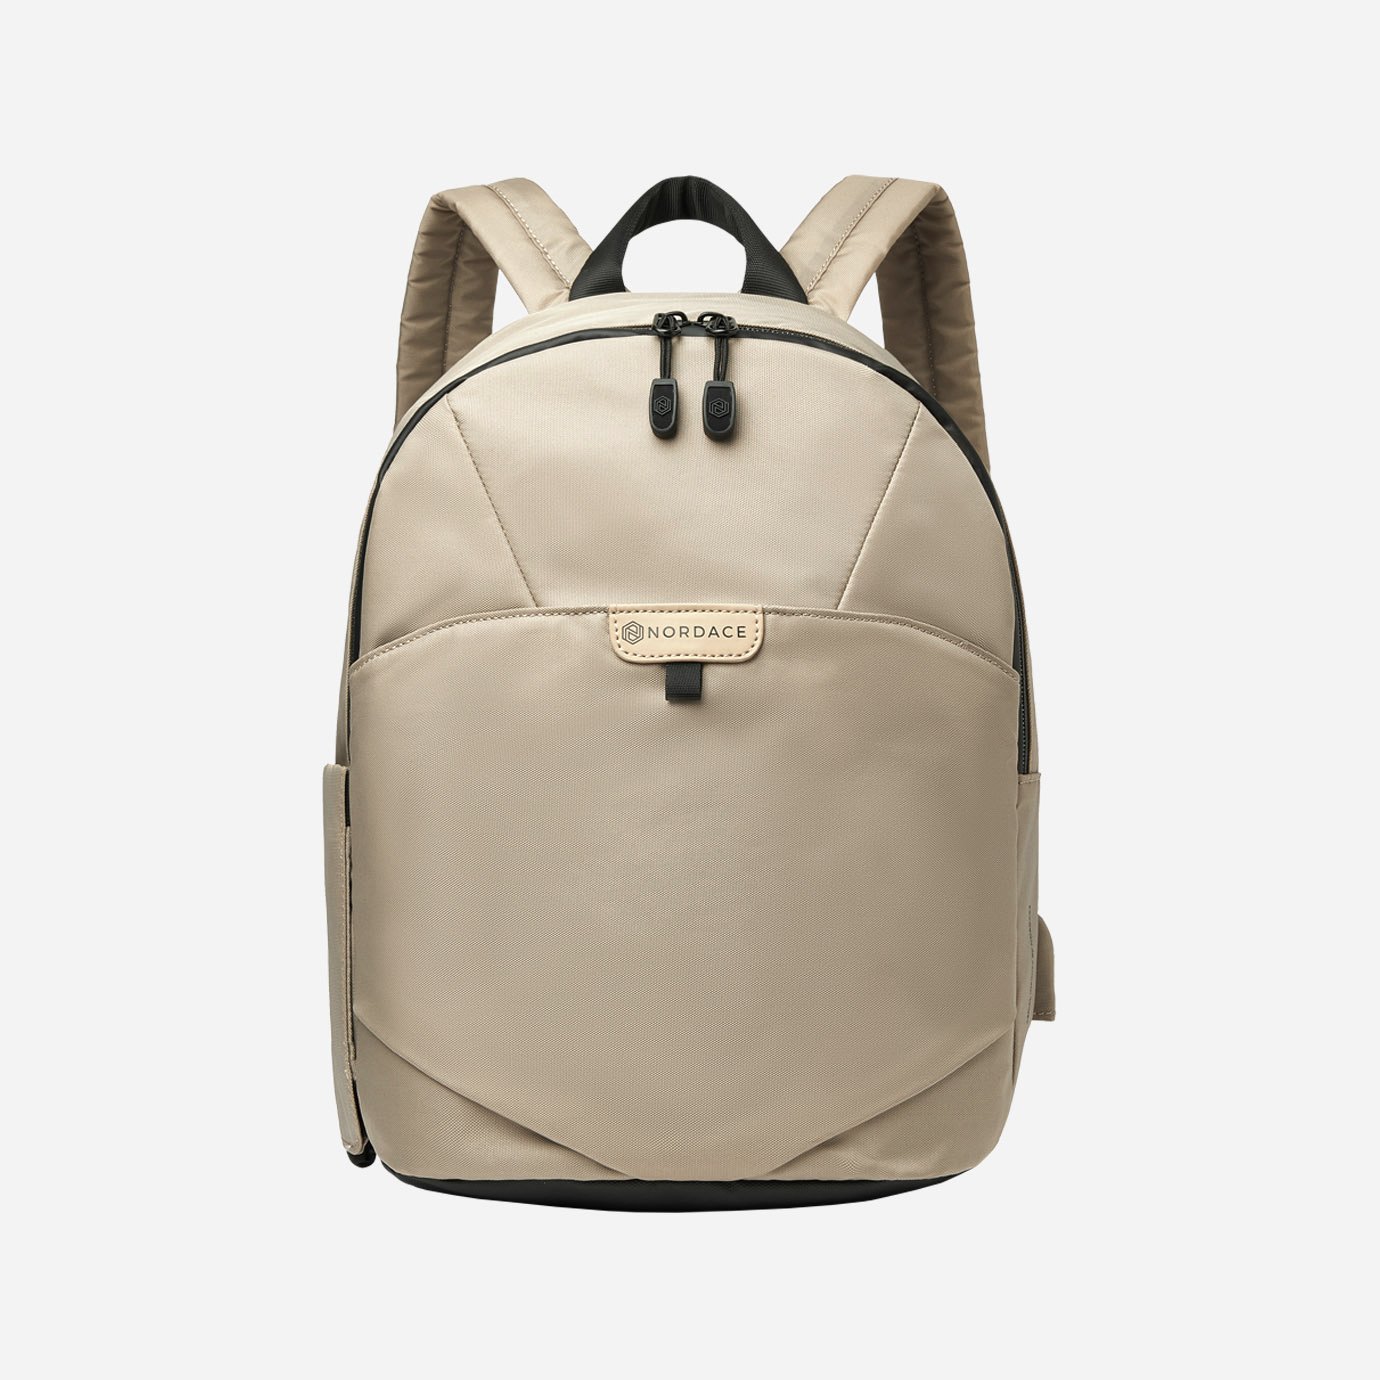 Nordace Aerial Infinity Mini Backpack 迷你智能背包- Yuenyewh遠野倉庫